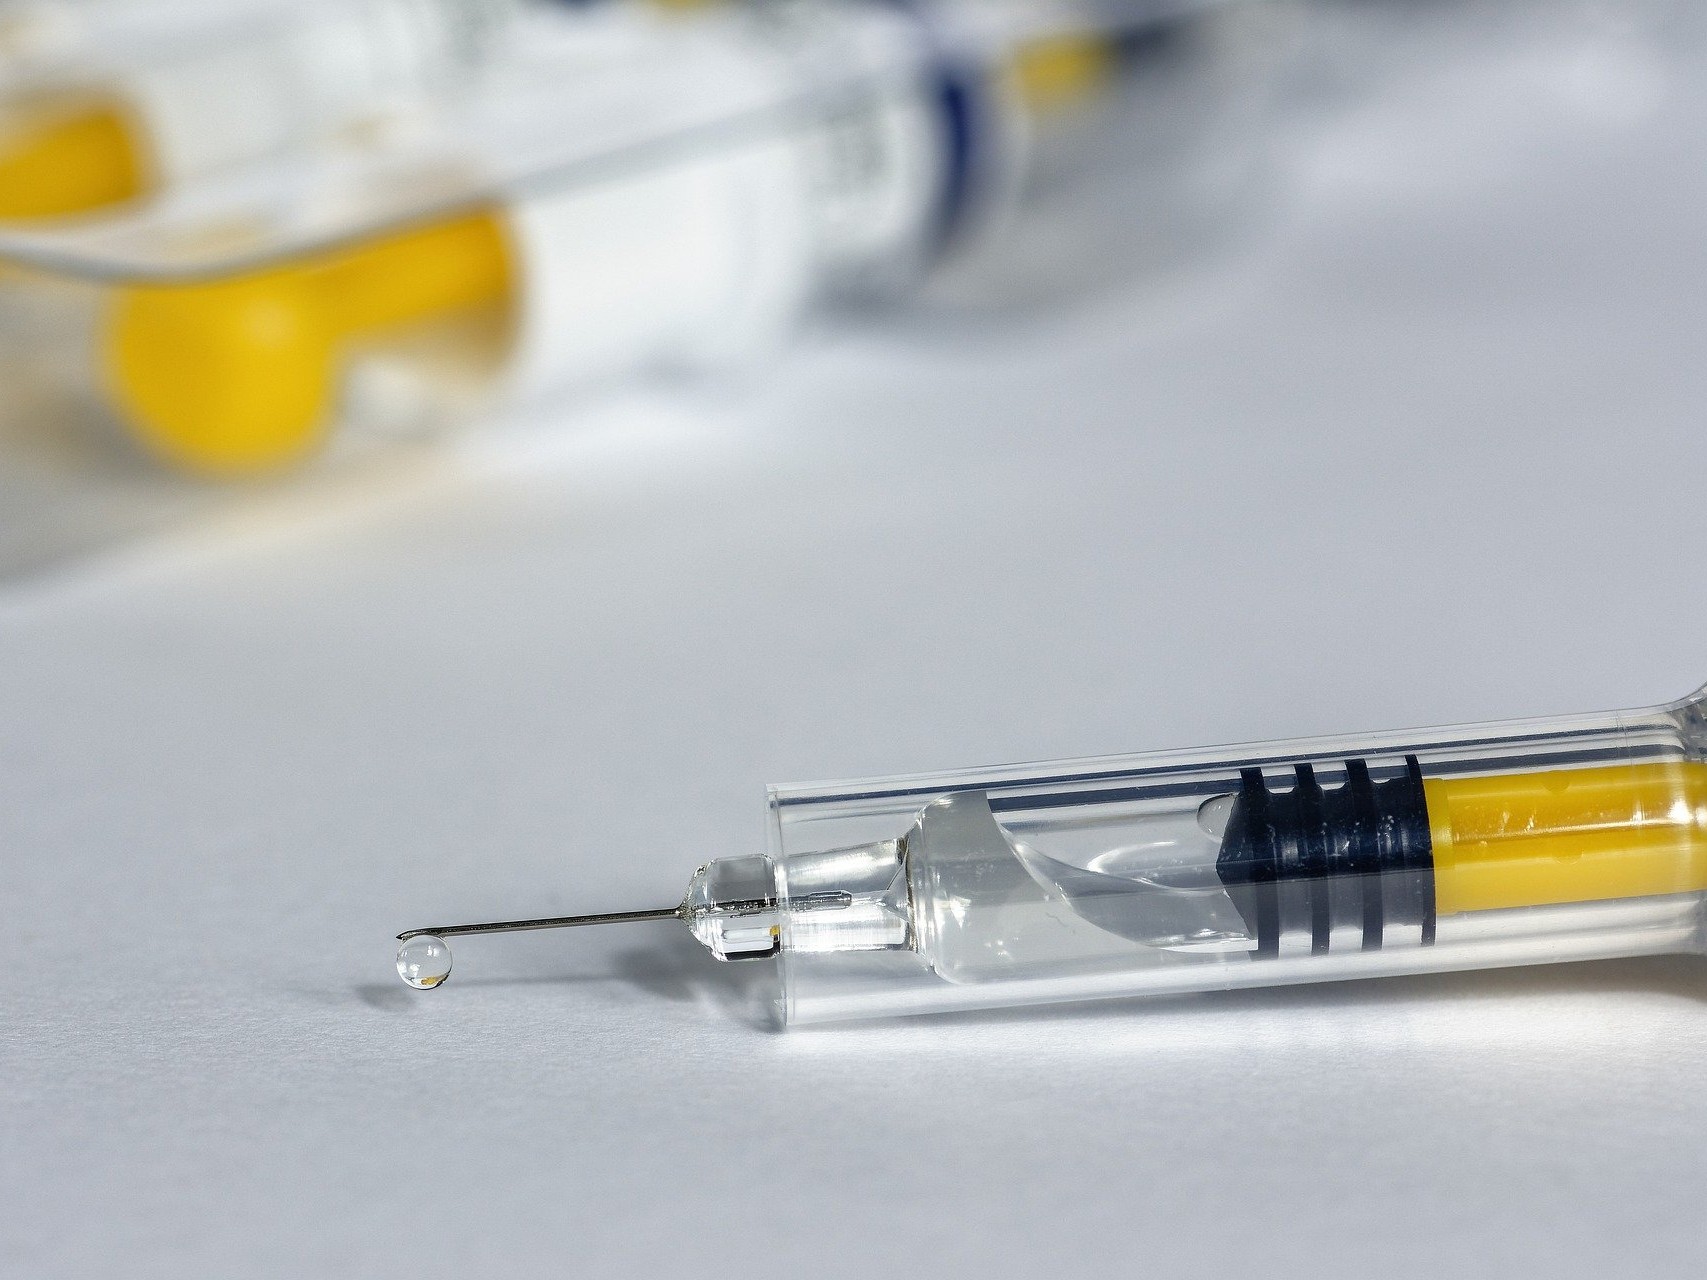 A second COVID-19 vaccine just reported excellent results. What now?